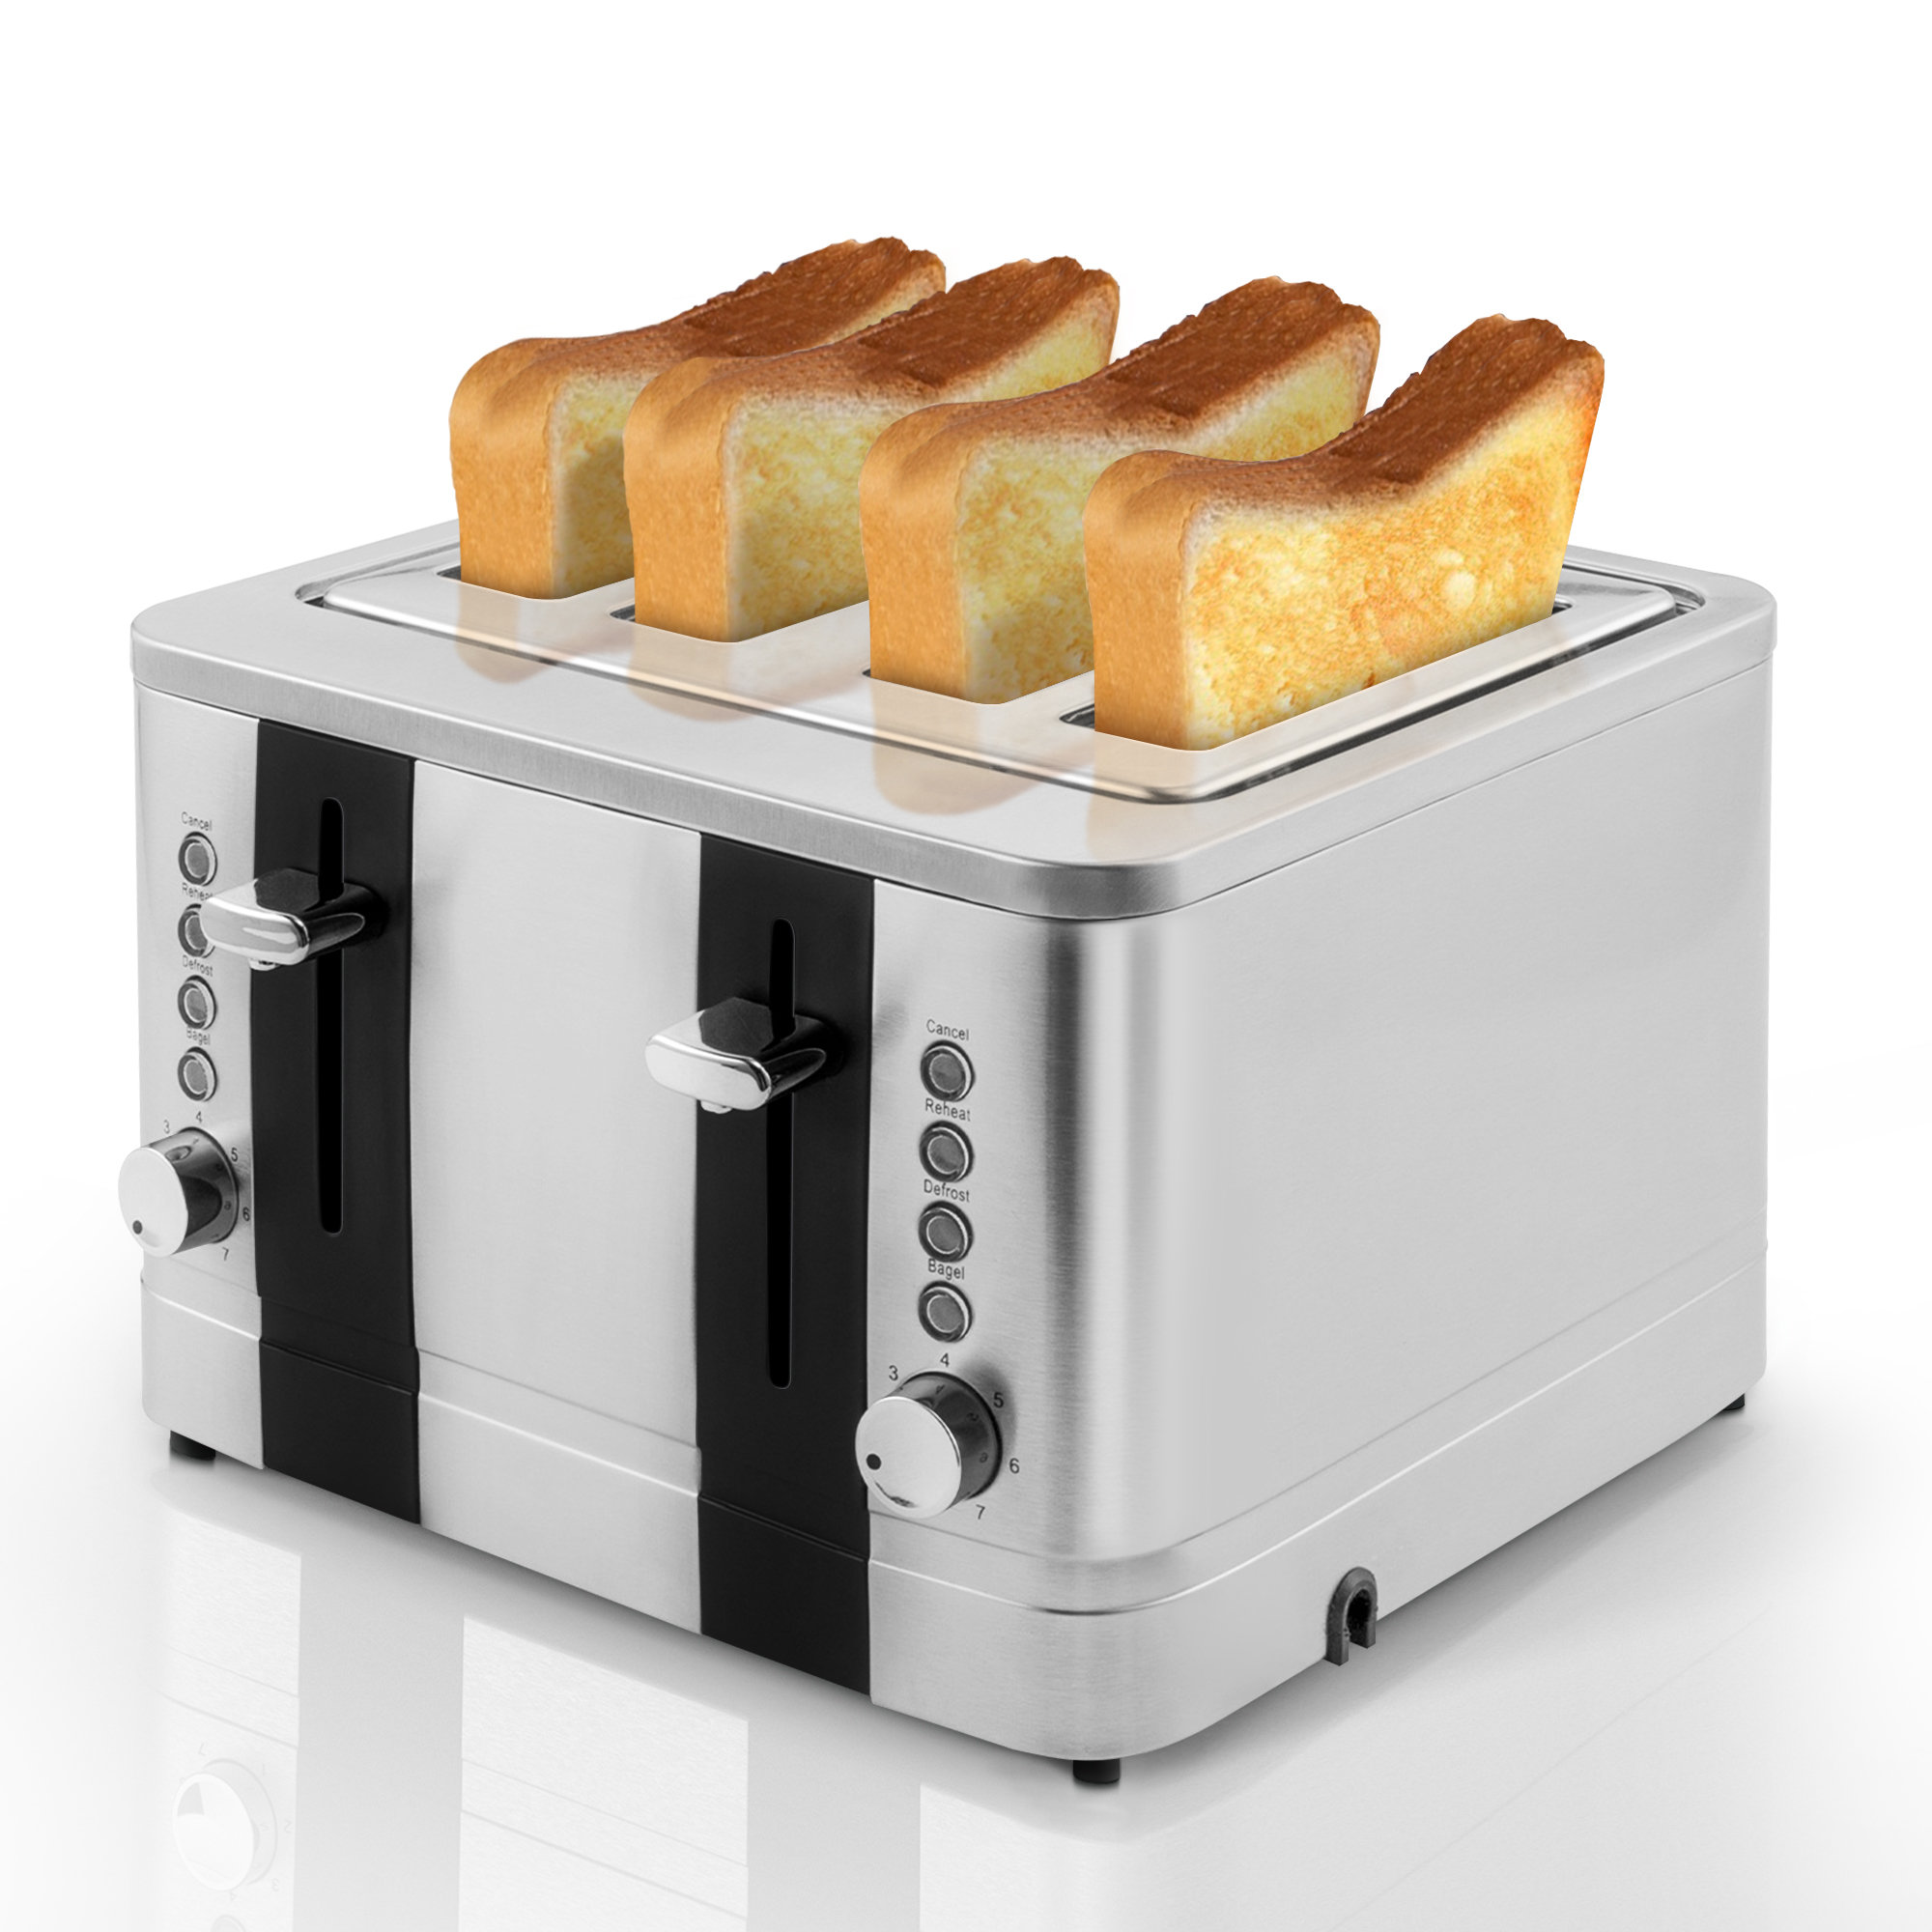 Lifease Geek Chef 4 Slice Stainless Steel Extra-wide Slot Toaster